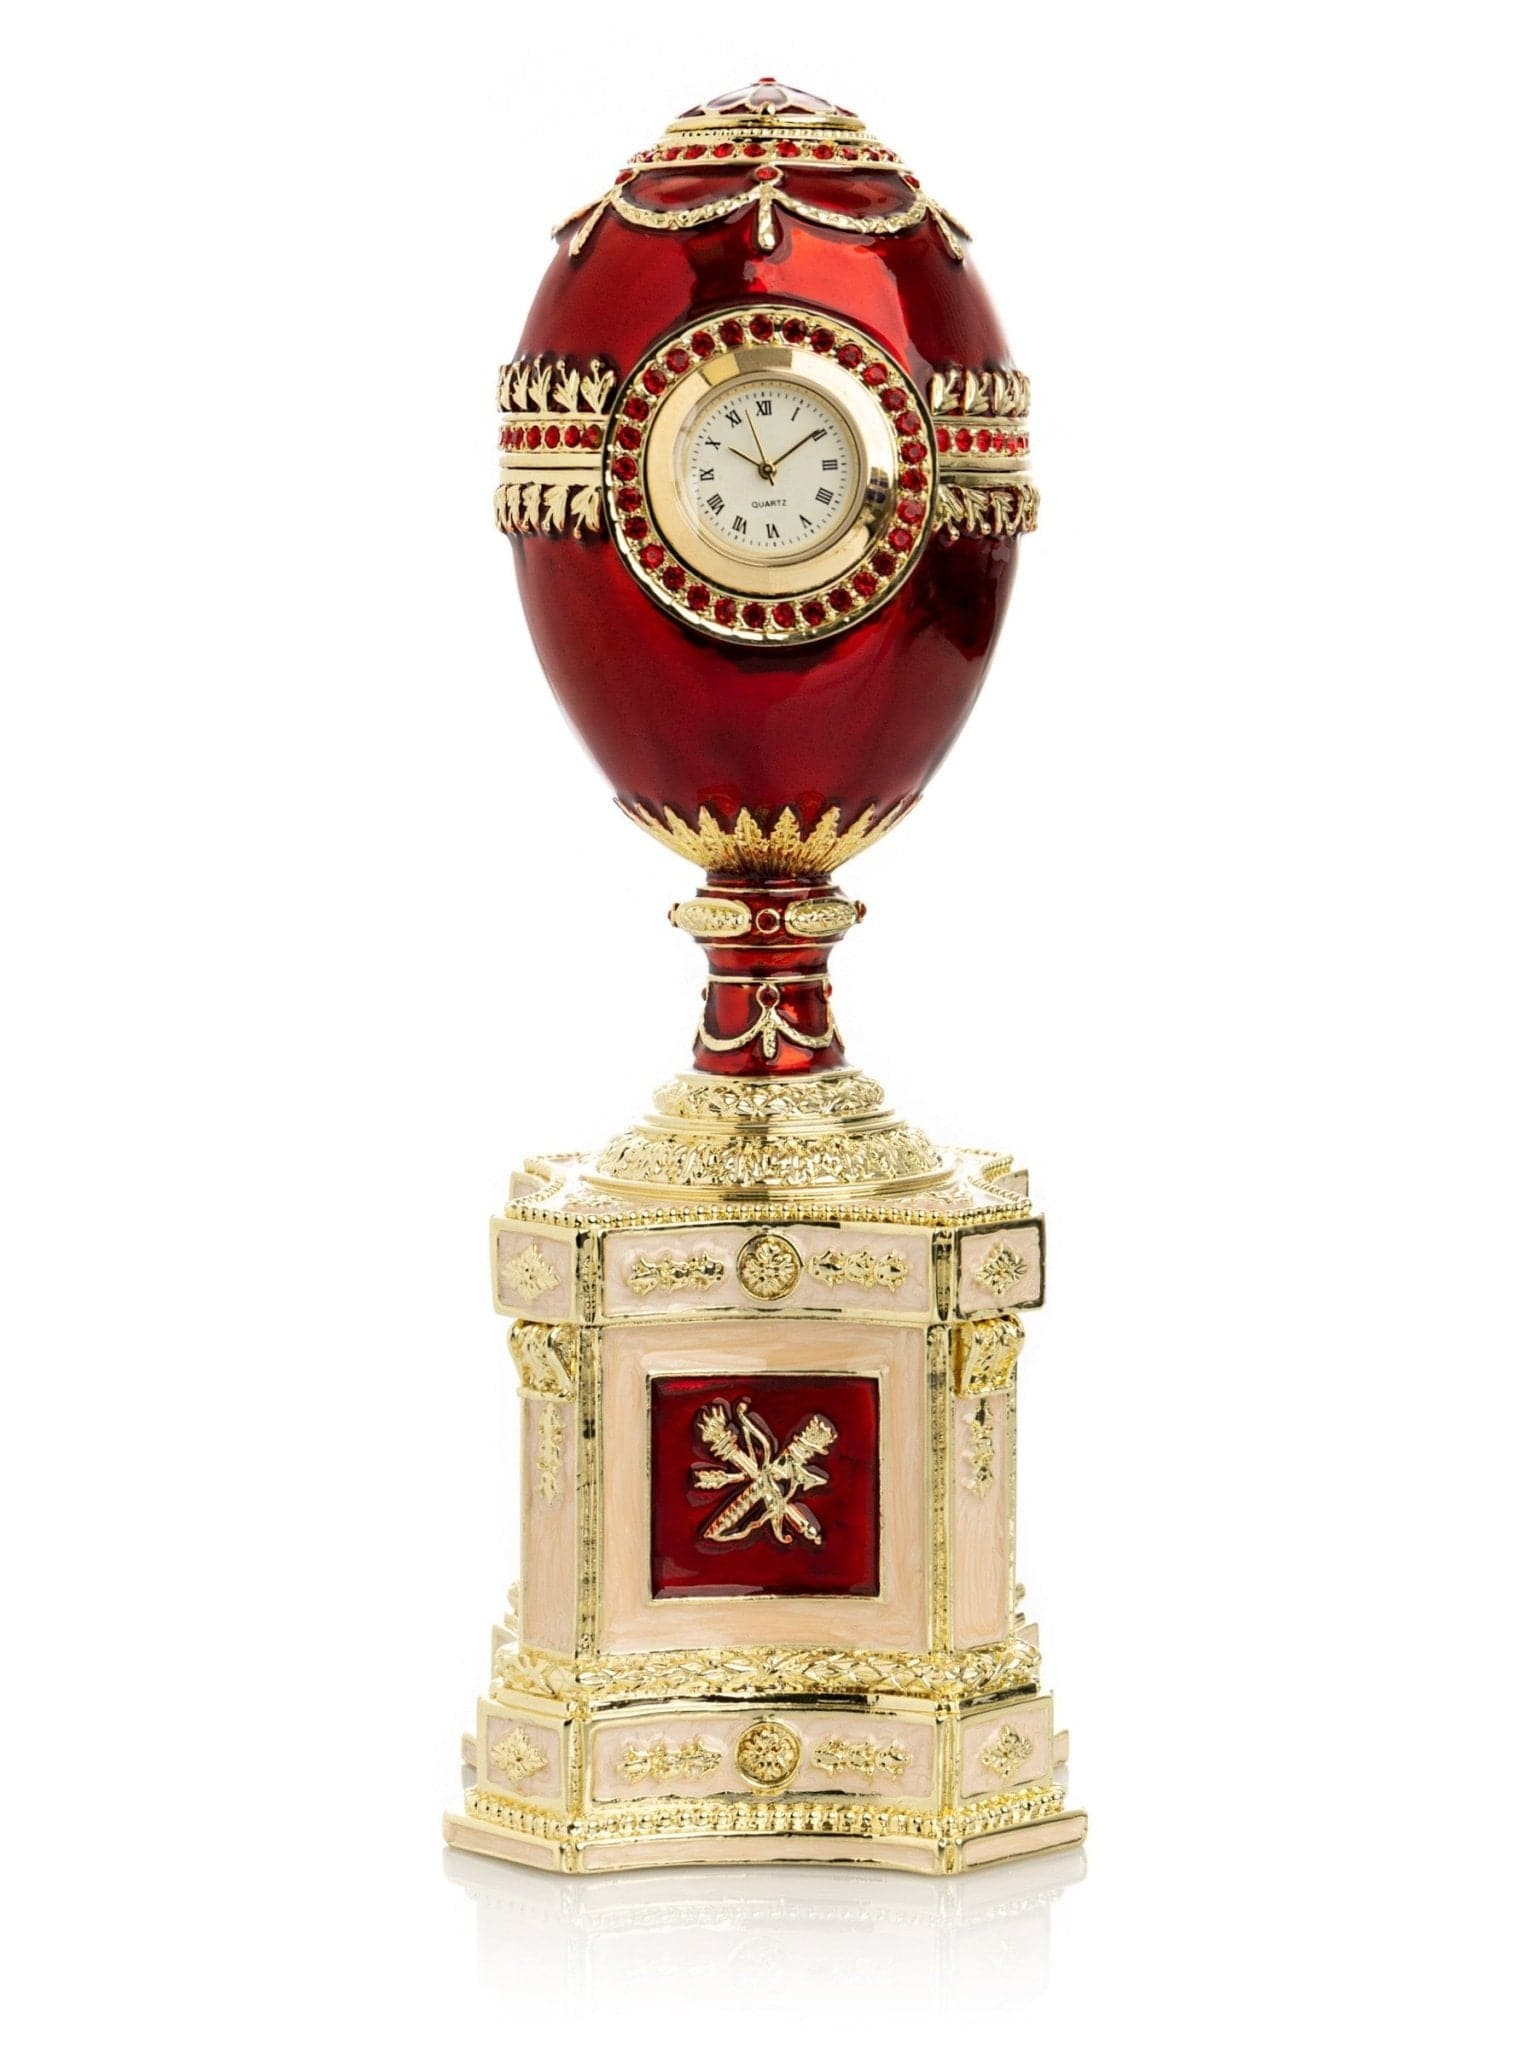 Red Faberge Egg with a Pearl and a Clock - Treasures of my HeART